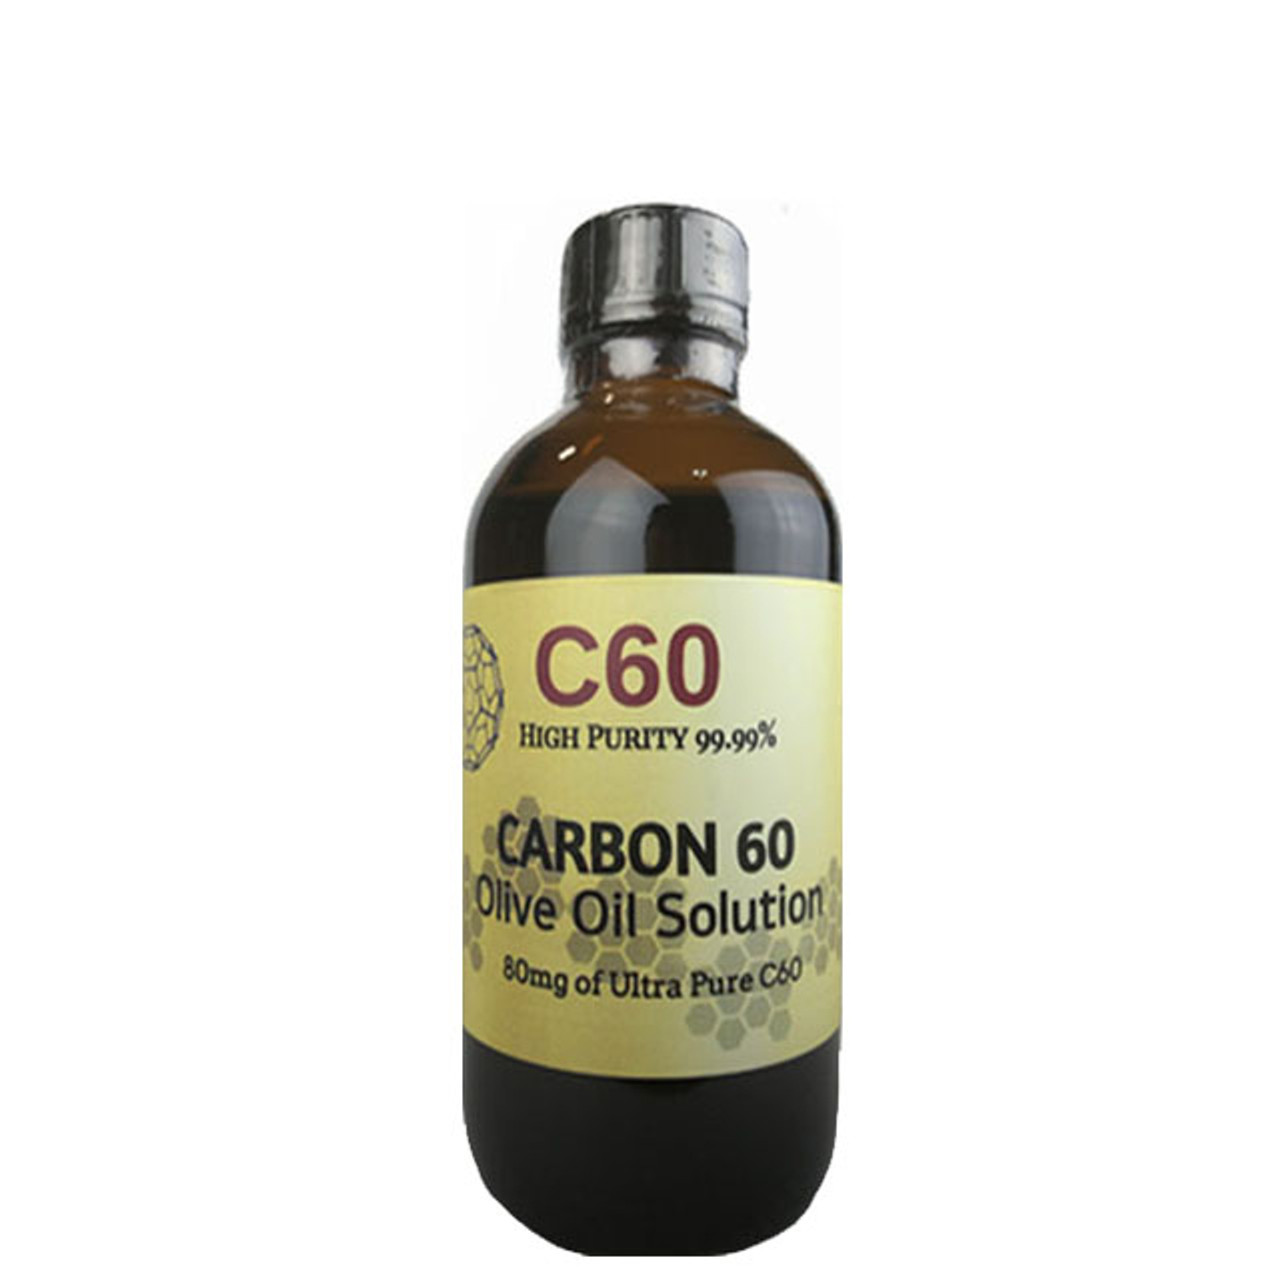 What You Need to Know About the C60 Supplement